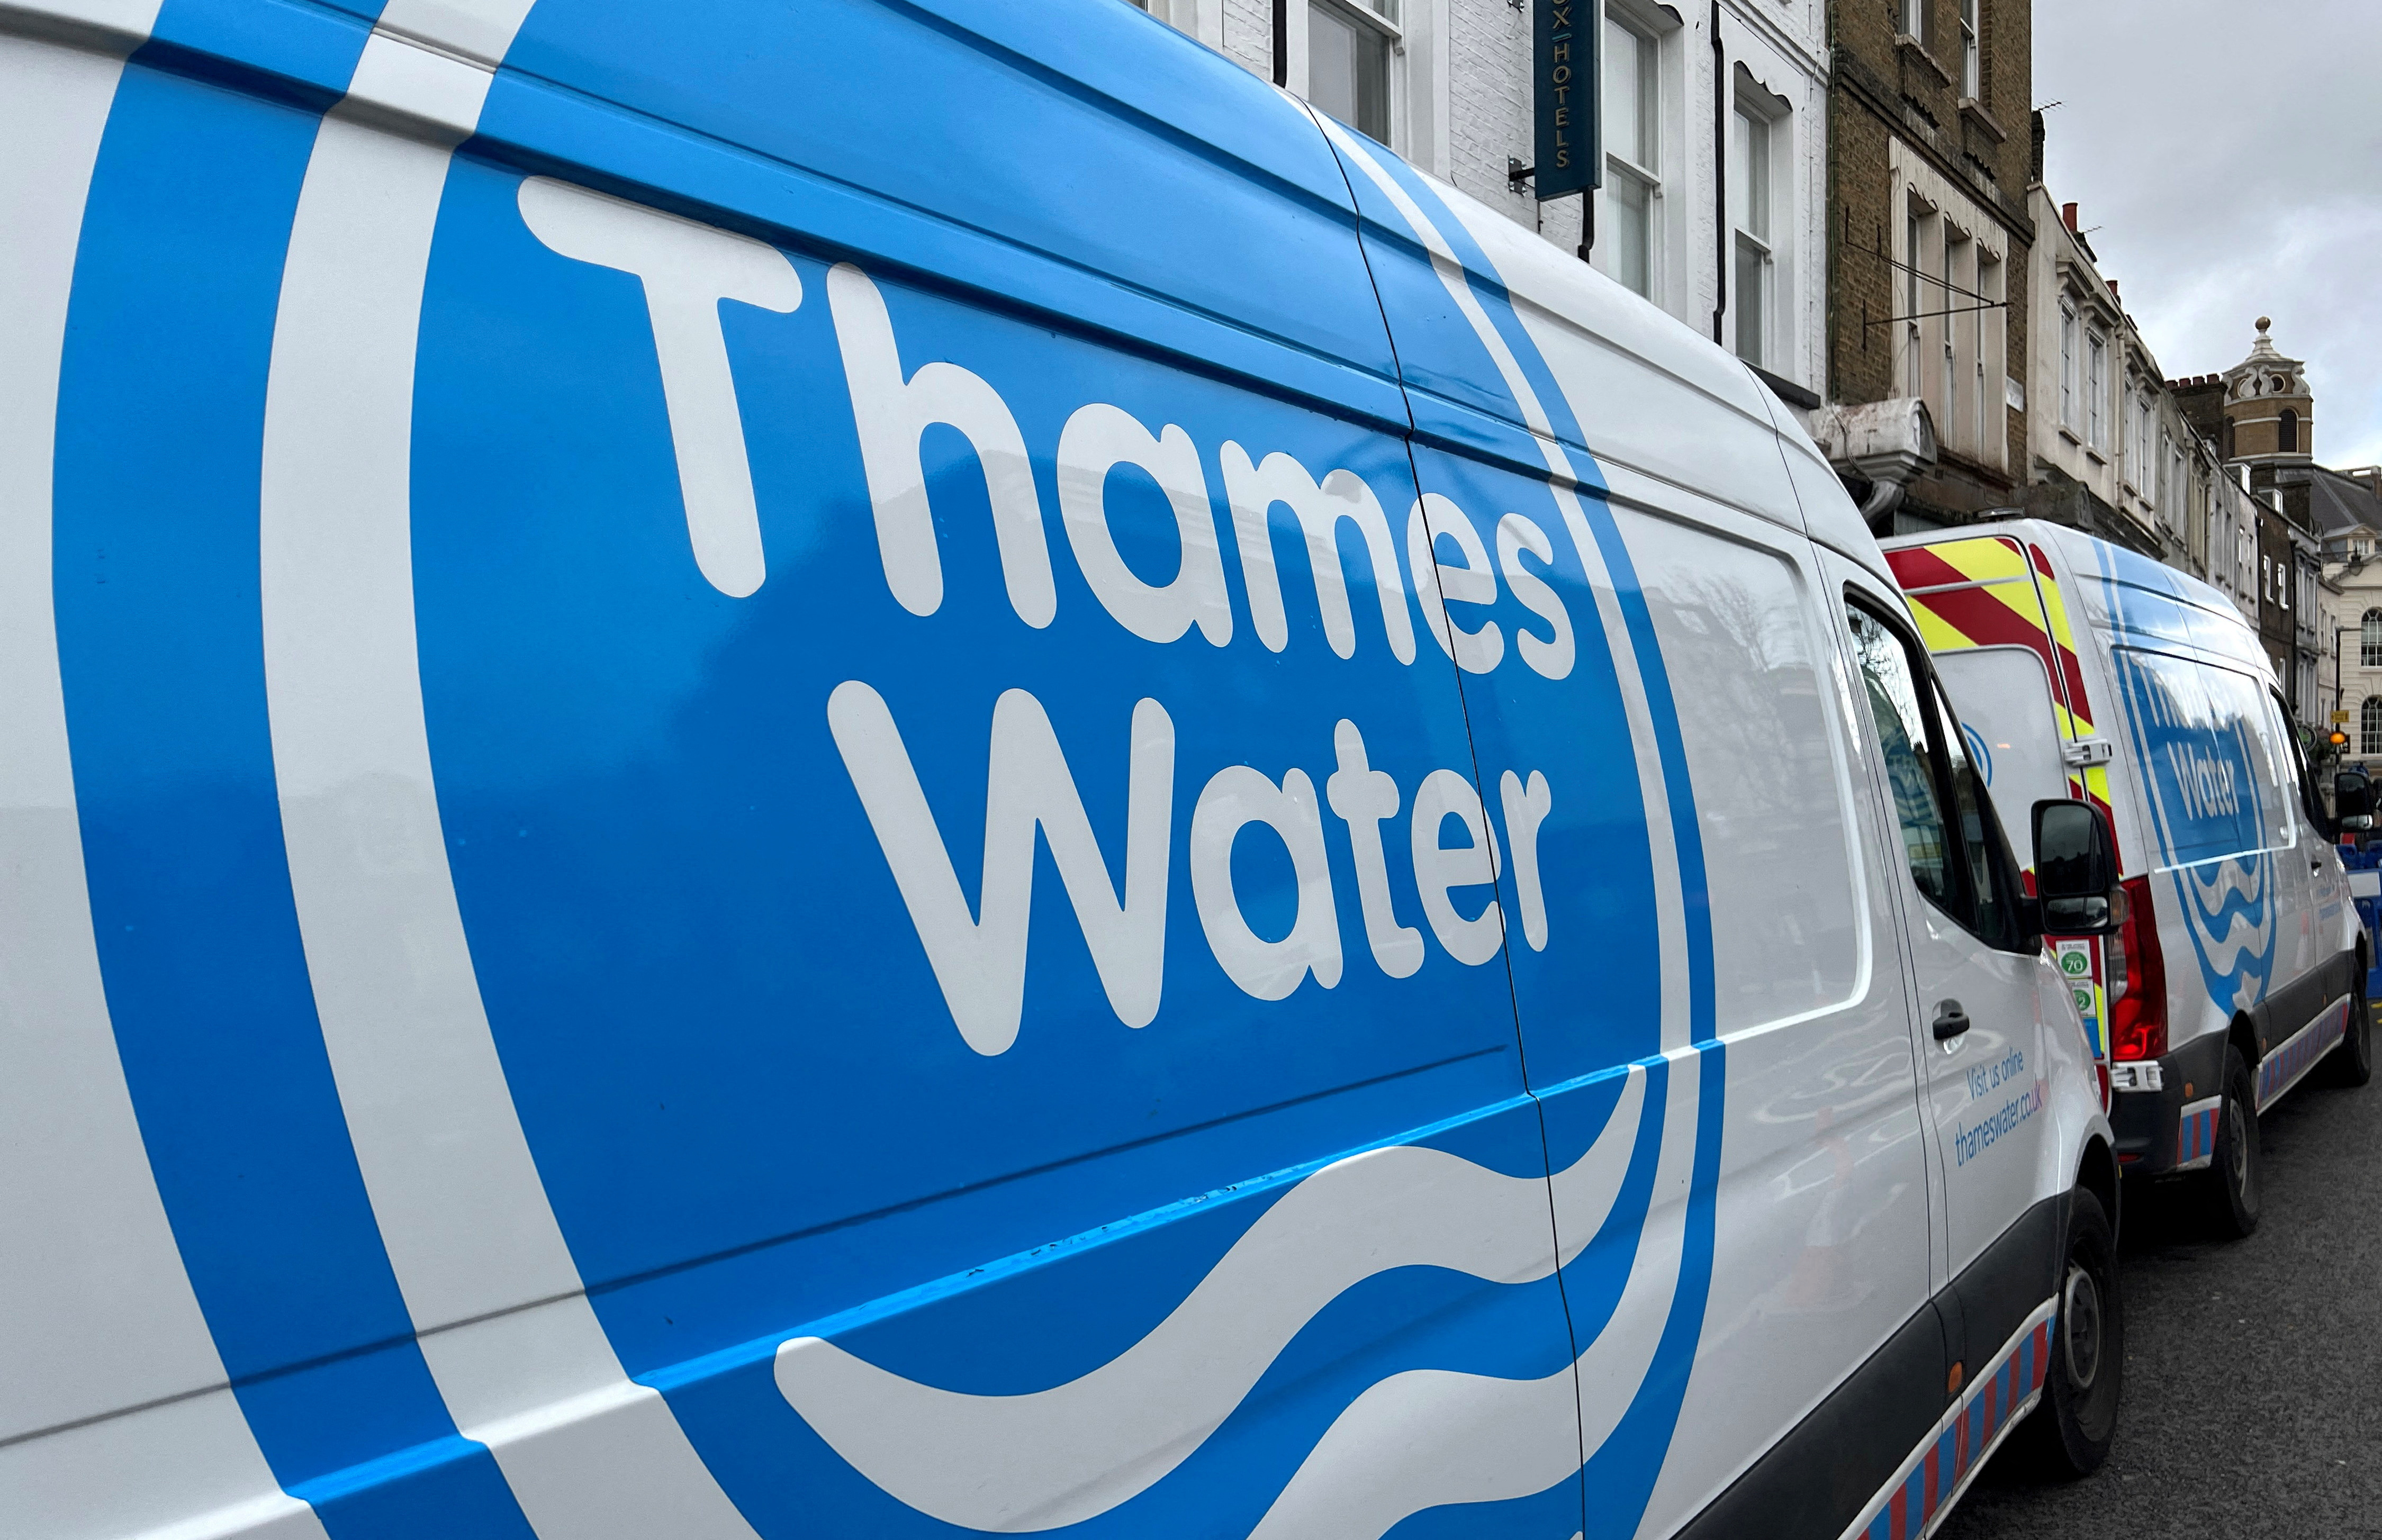 Thames Water vans are parked as repair and maintenance work takes place, in London